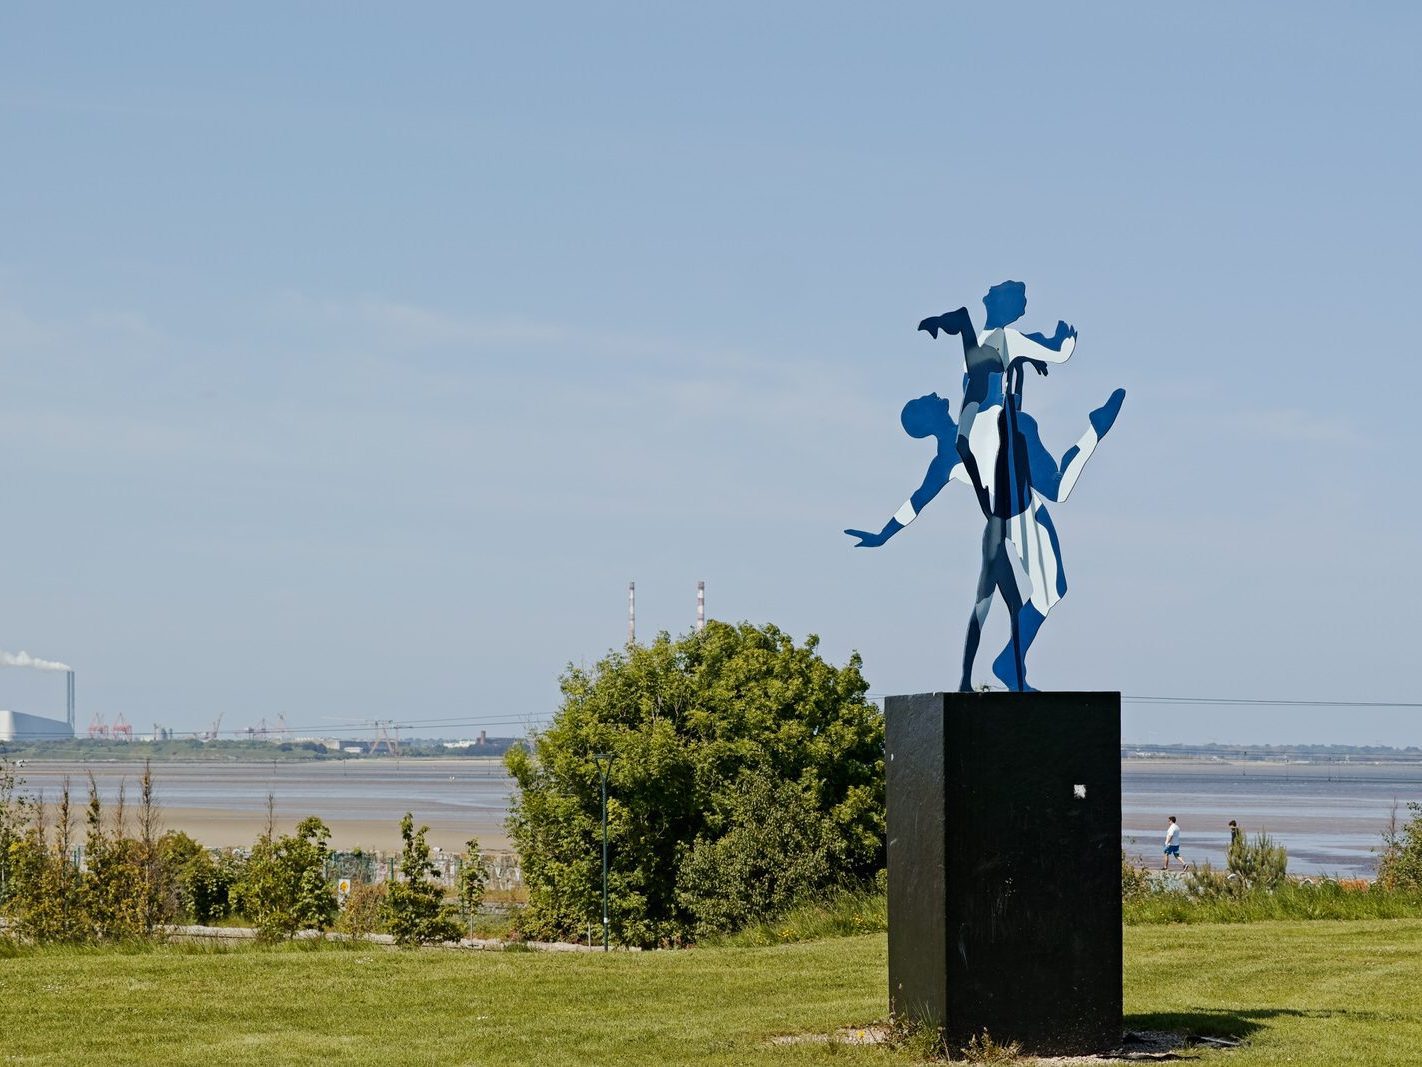 DANNY MacCARTHY'S CUT OUT PEOPLE [THIS SCULPTURE CAN BE FOUND IN BLACKROCK PARK] 002